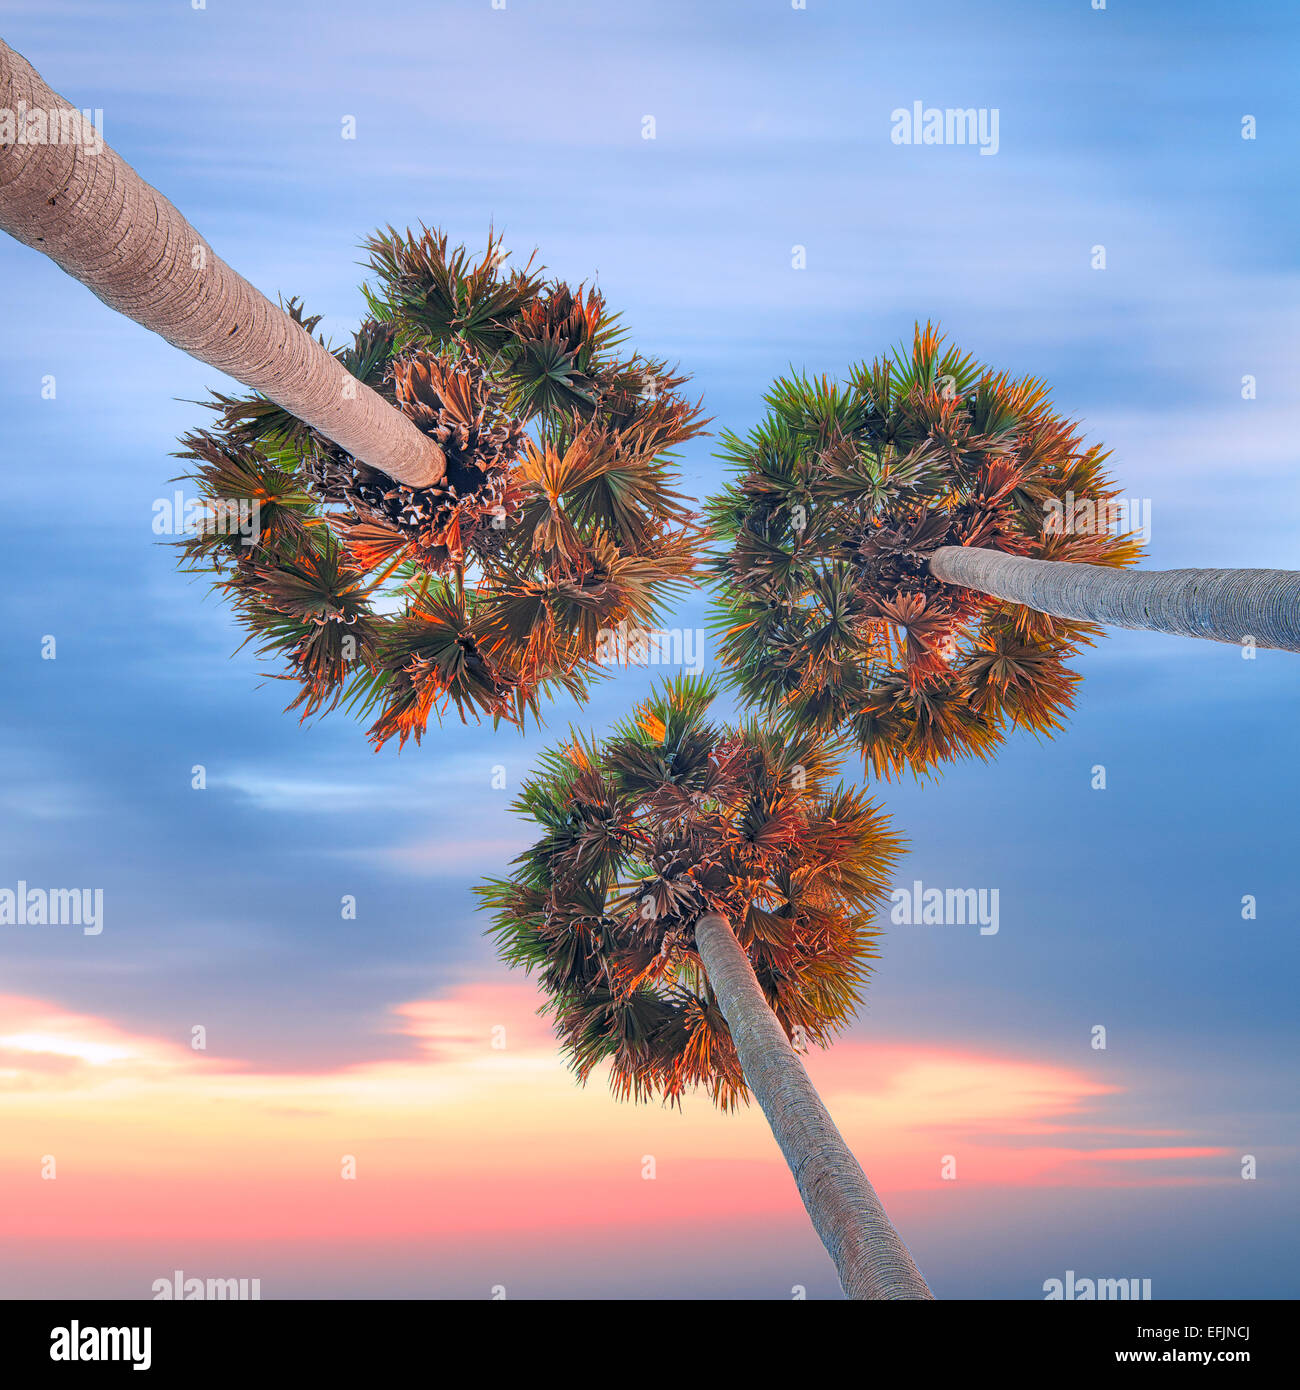 Three high palm trees shot from below on sunset sky background Stock Photo